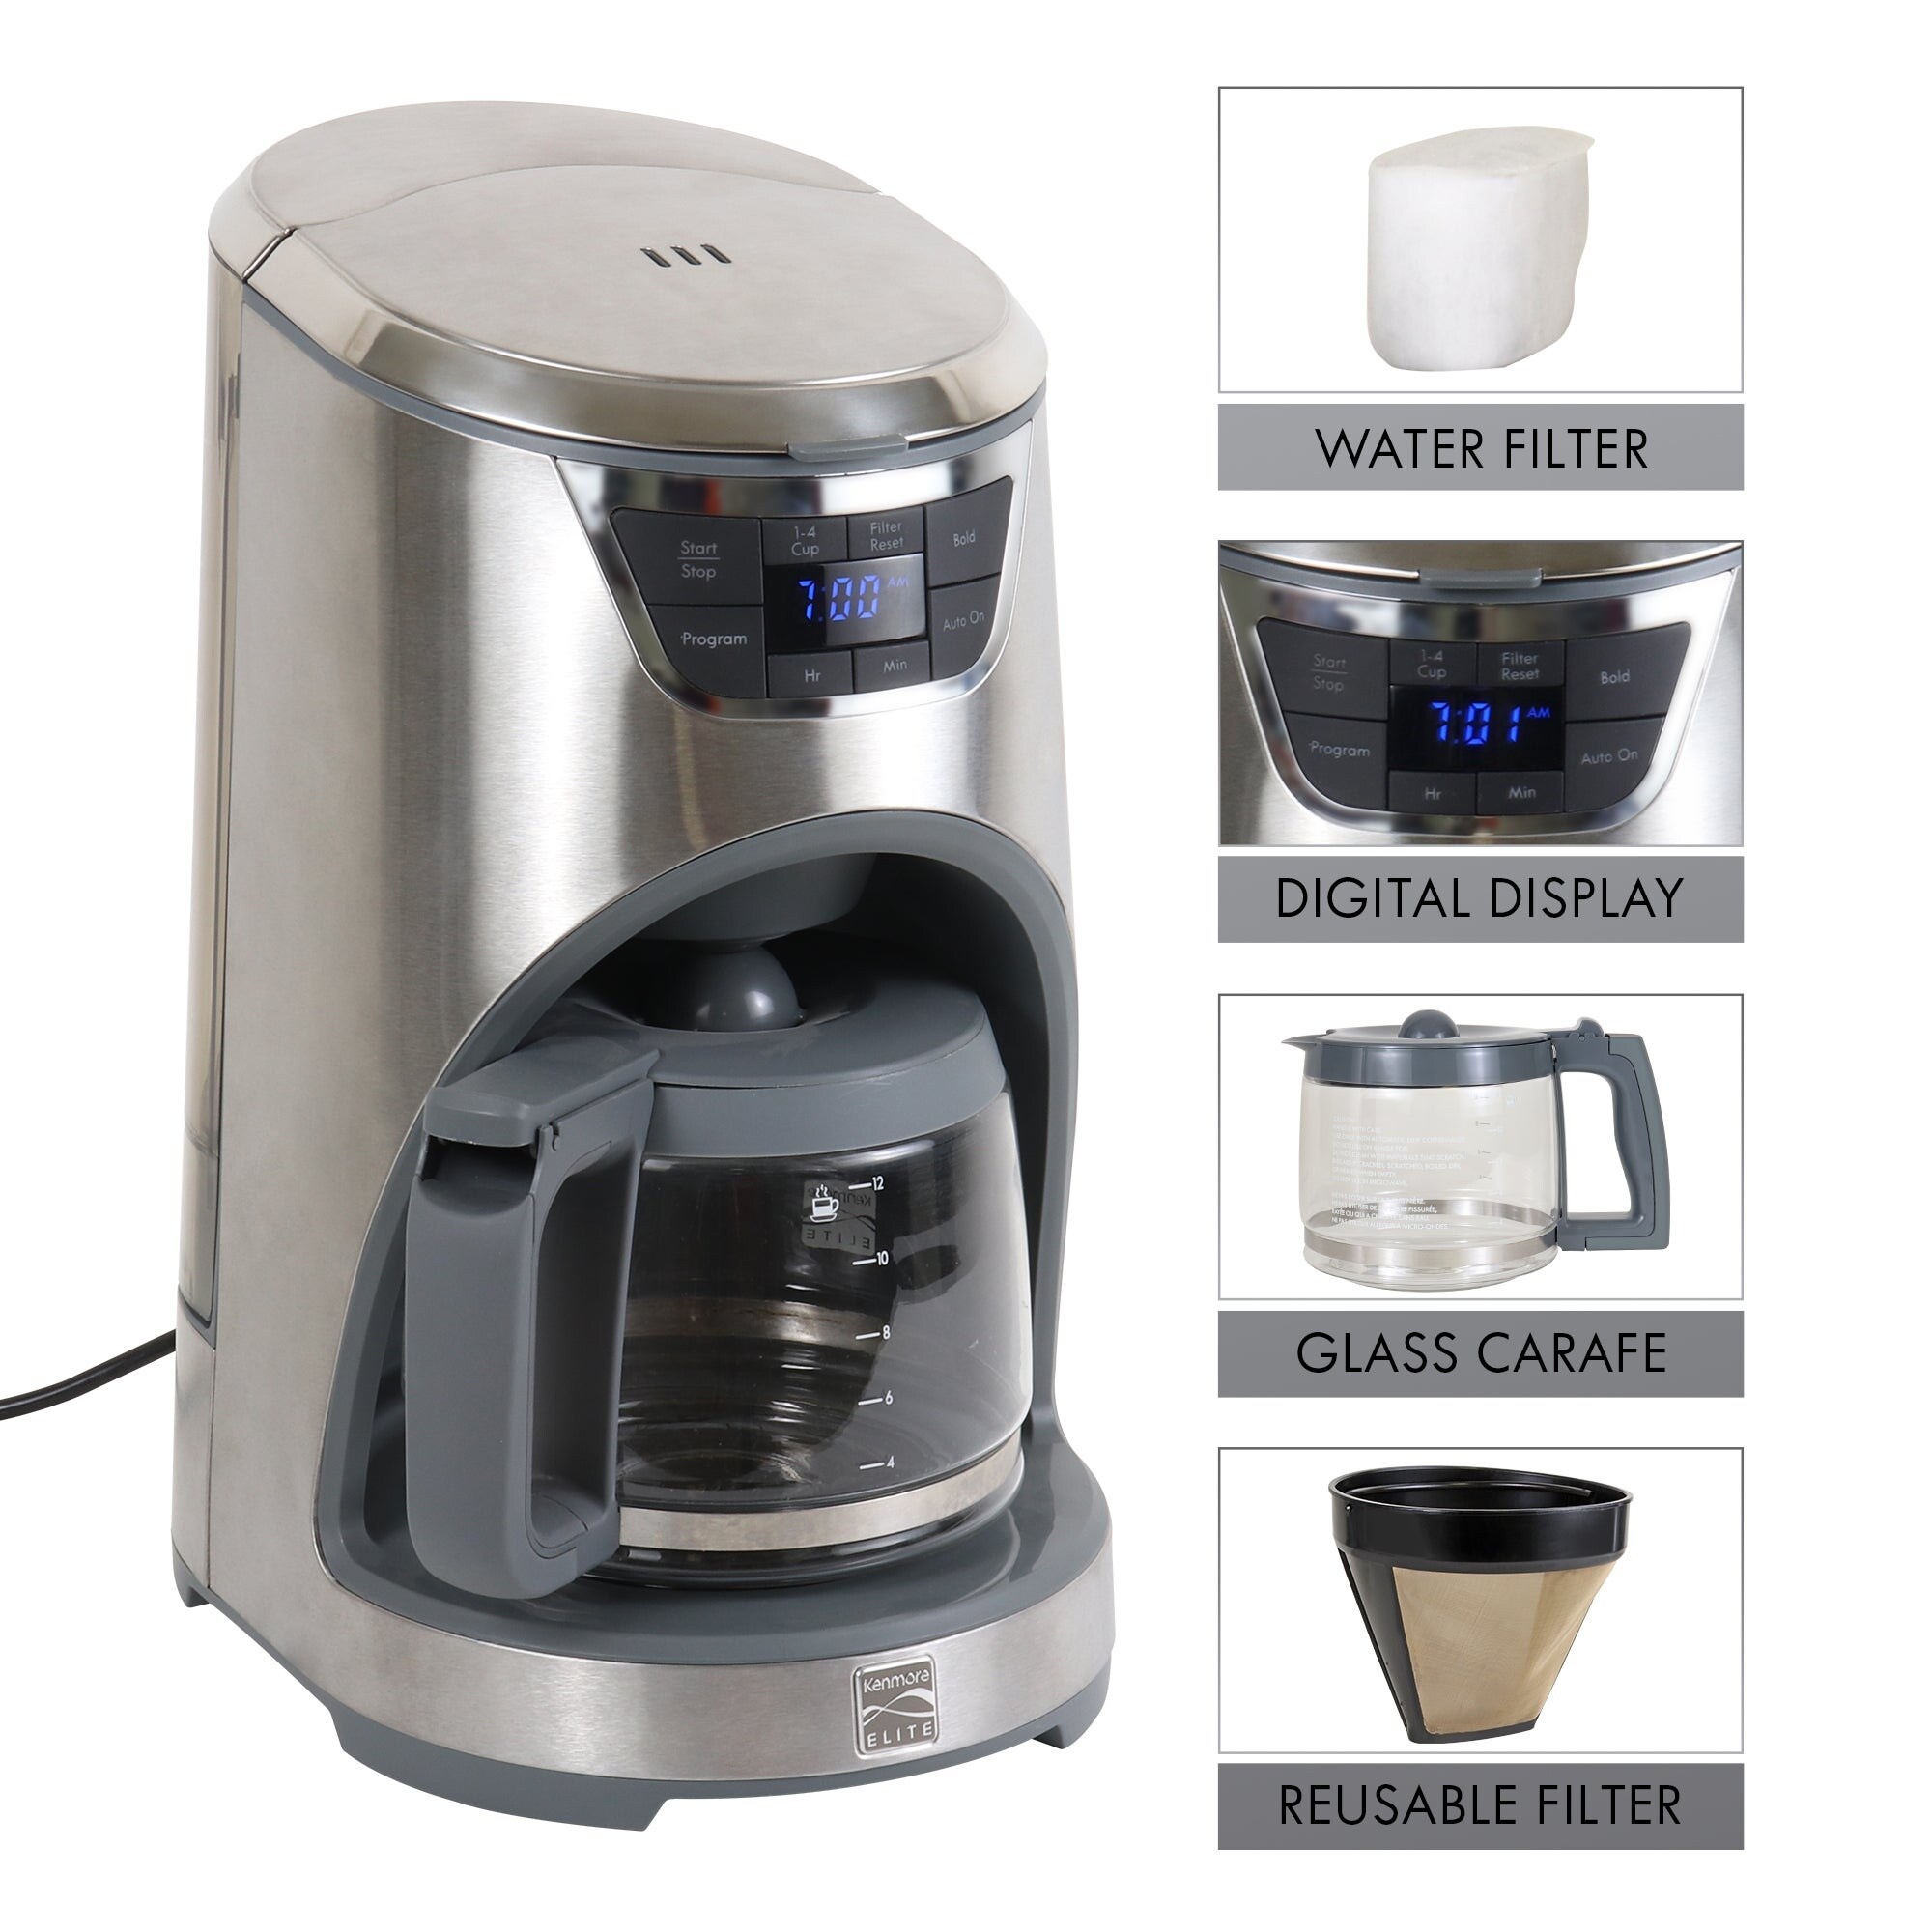 https://ak1.ostkcdn.com/images/products/is/images/direct/2174fb68d3981b7c844e8459ad4422bbb1f8a815/Kenmore-Elite-Programmable-12-cup-Coffee-Maker%2C-Aroma-Control%2C-Stainless-Steel%2C-Reusable-Filter.jpg